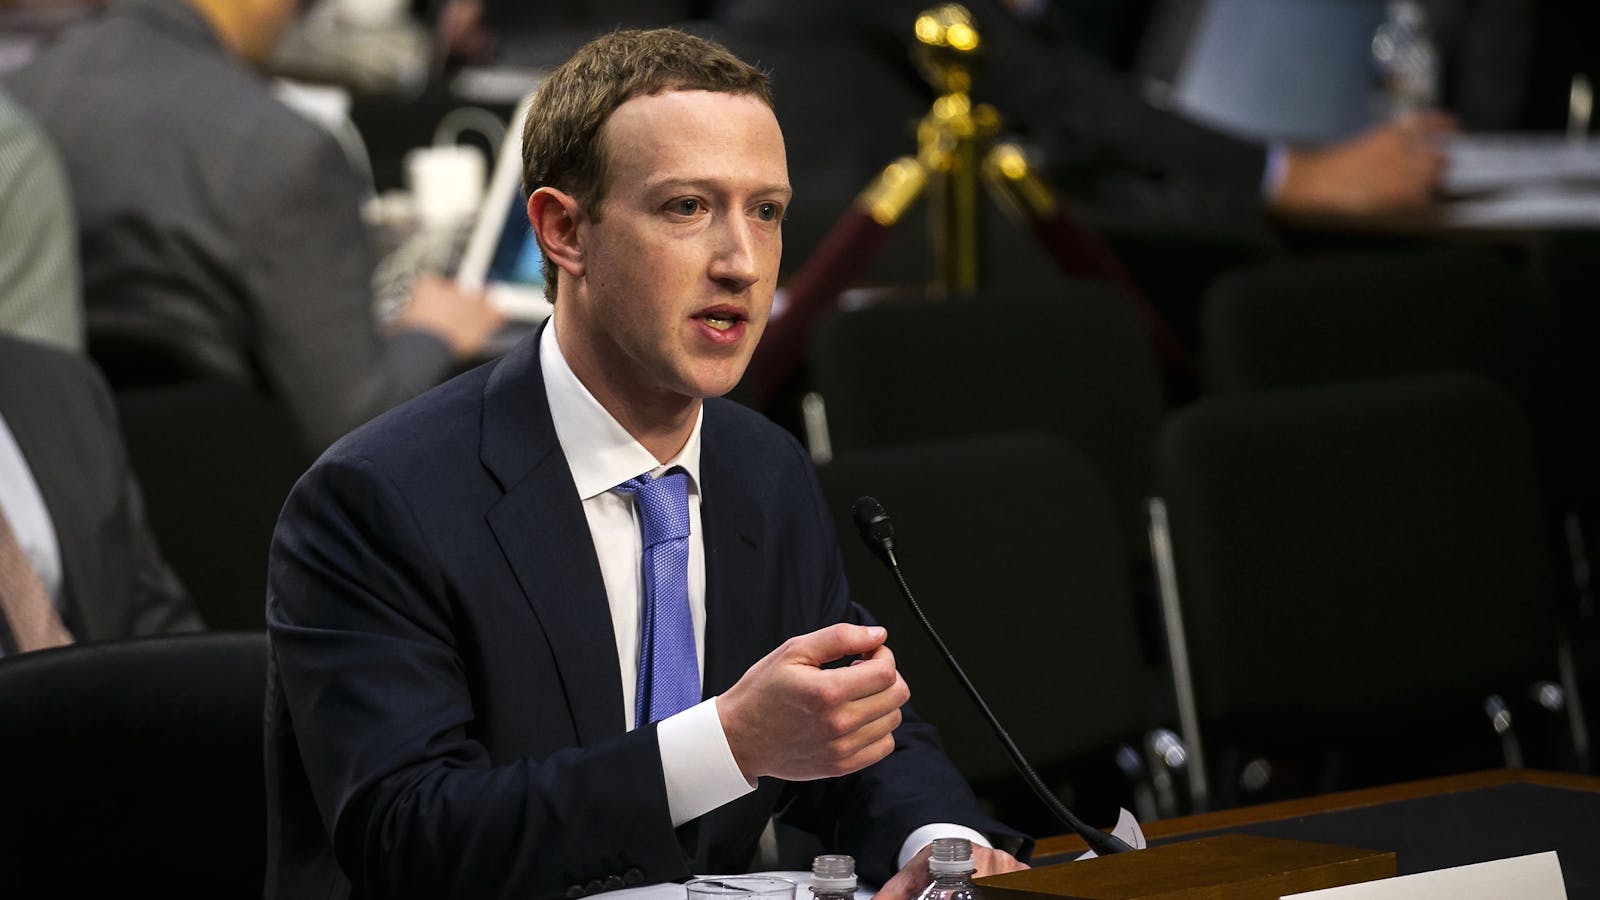 Facebook CEO Mark Zuckerberg testifying before Congress on Tuesday. Photo by Bloomberg.